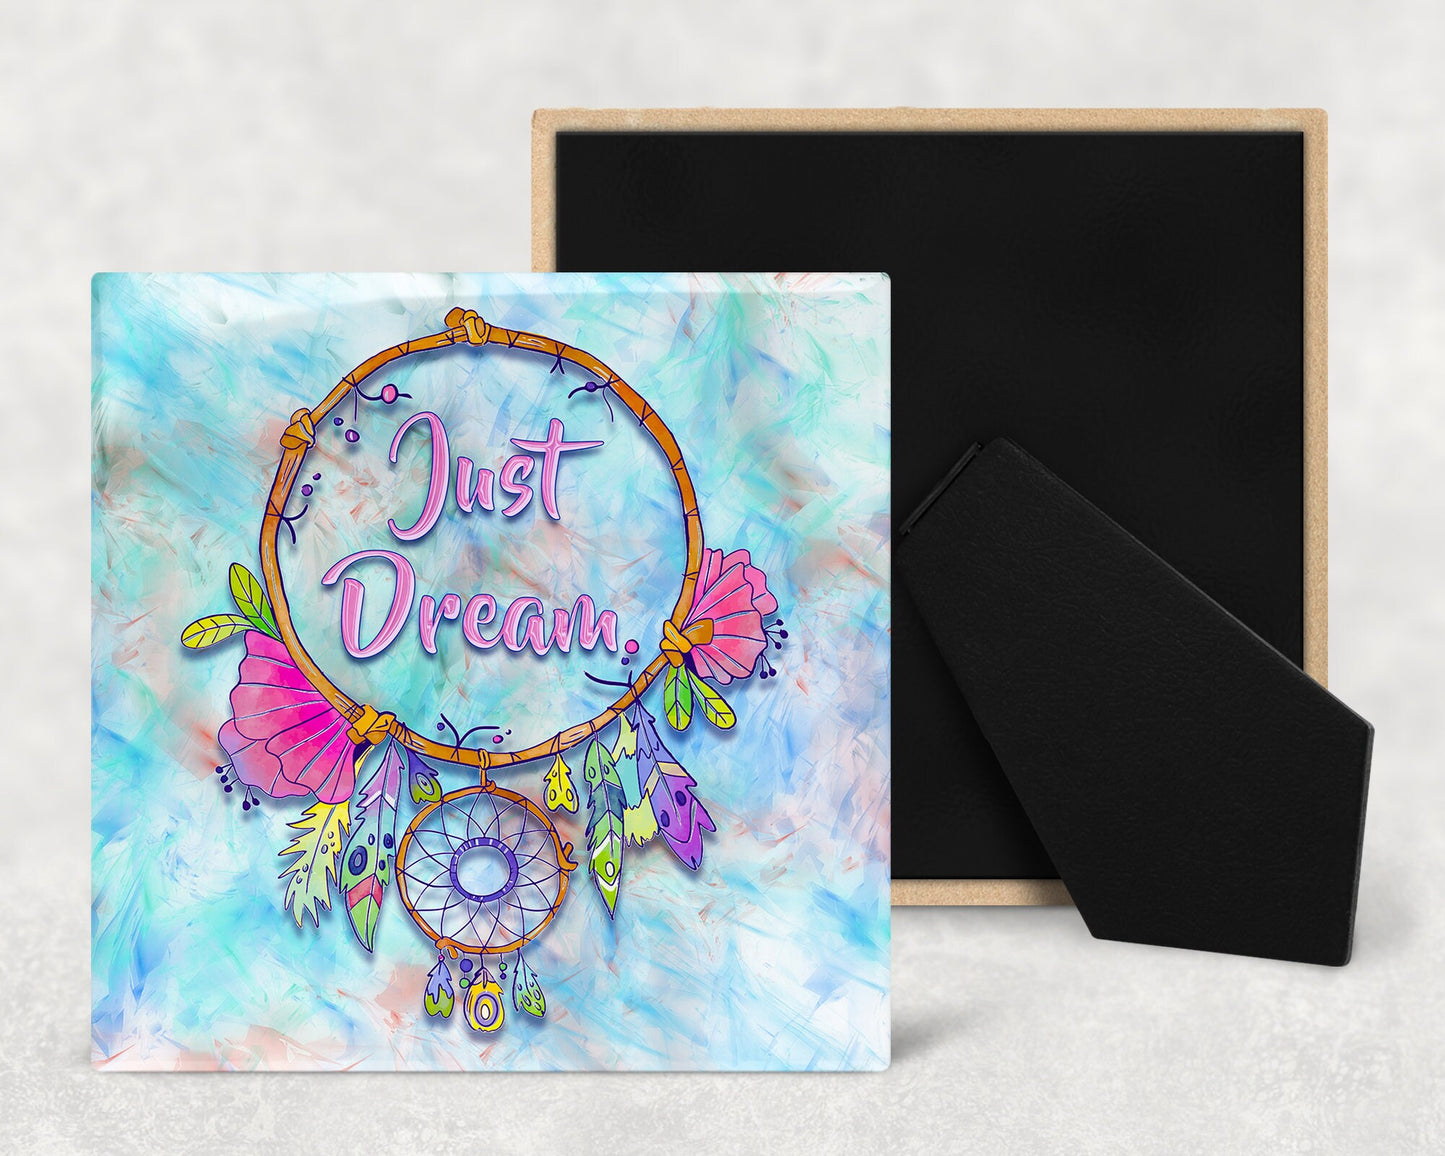 Just Dream Dreamcatcher Art Decorative Ceramic Tile with Optional Easel Back - Available in 3 Sizes